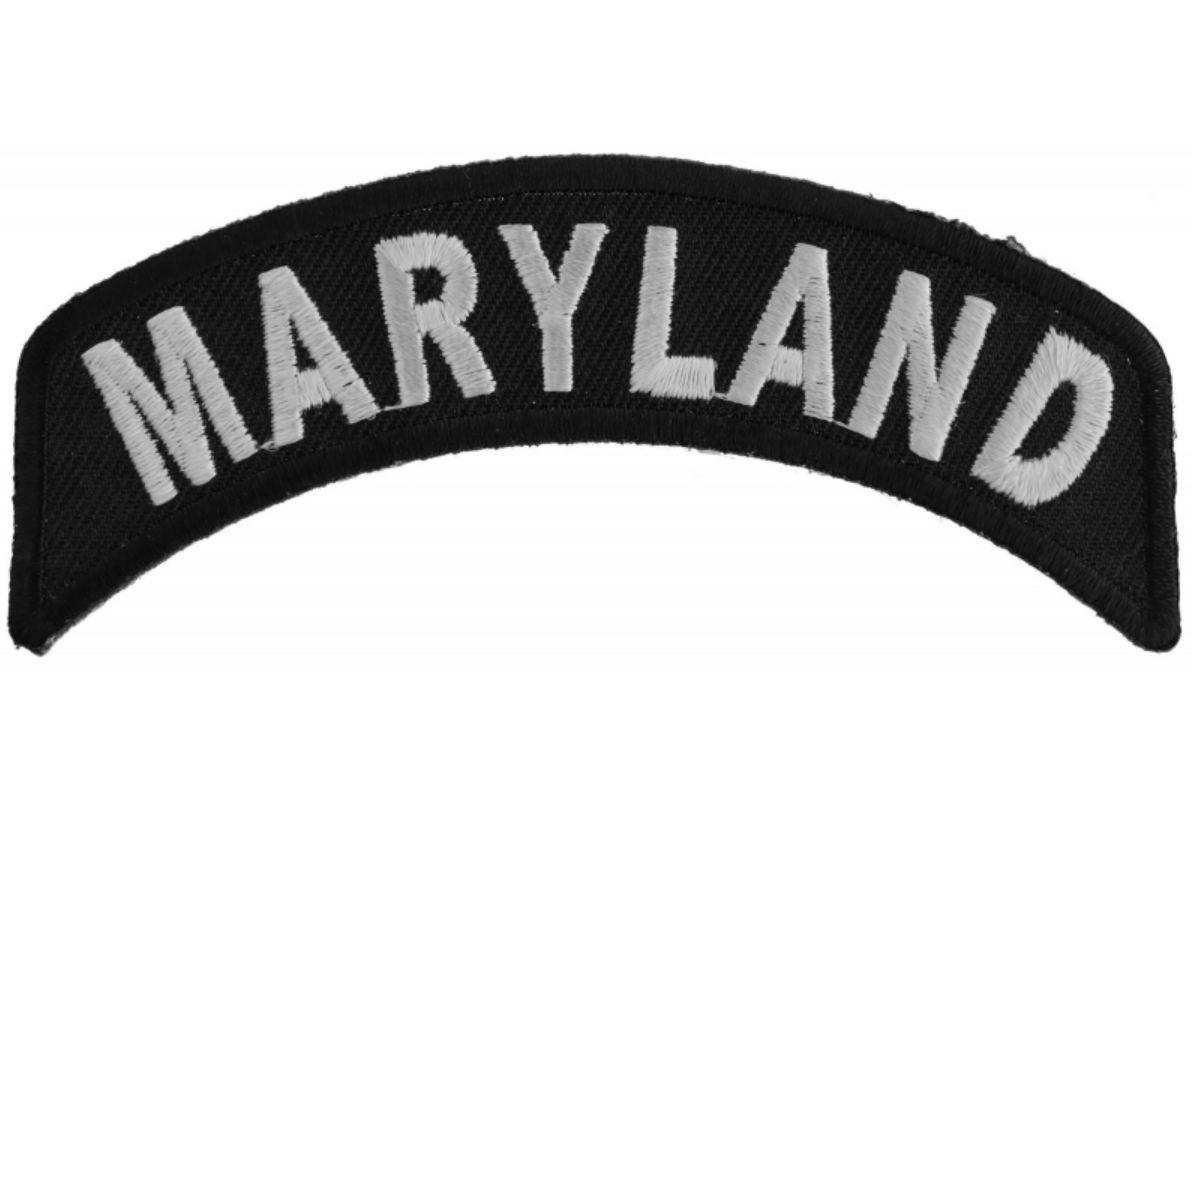 Daniel Smart Maryland Patch, 4 x 1.75 inches - American Legend Rider